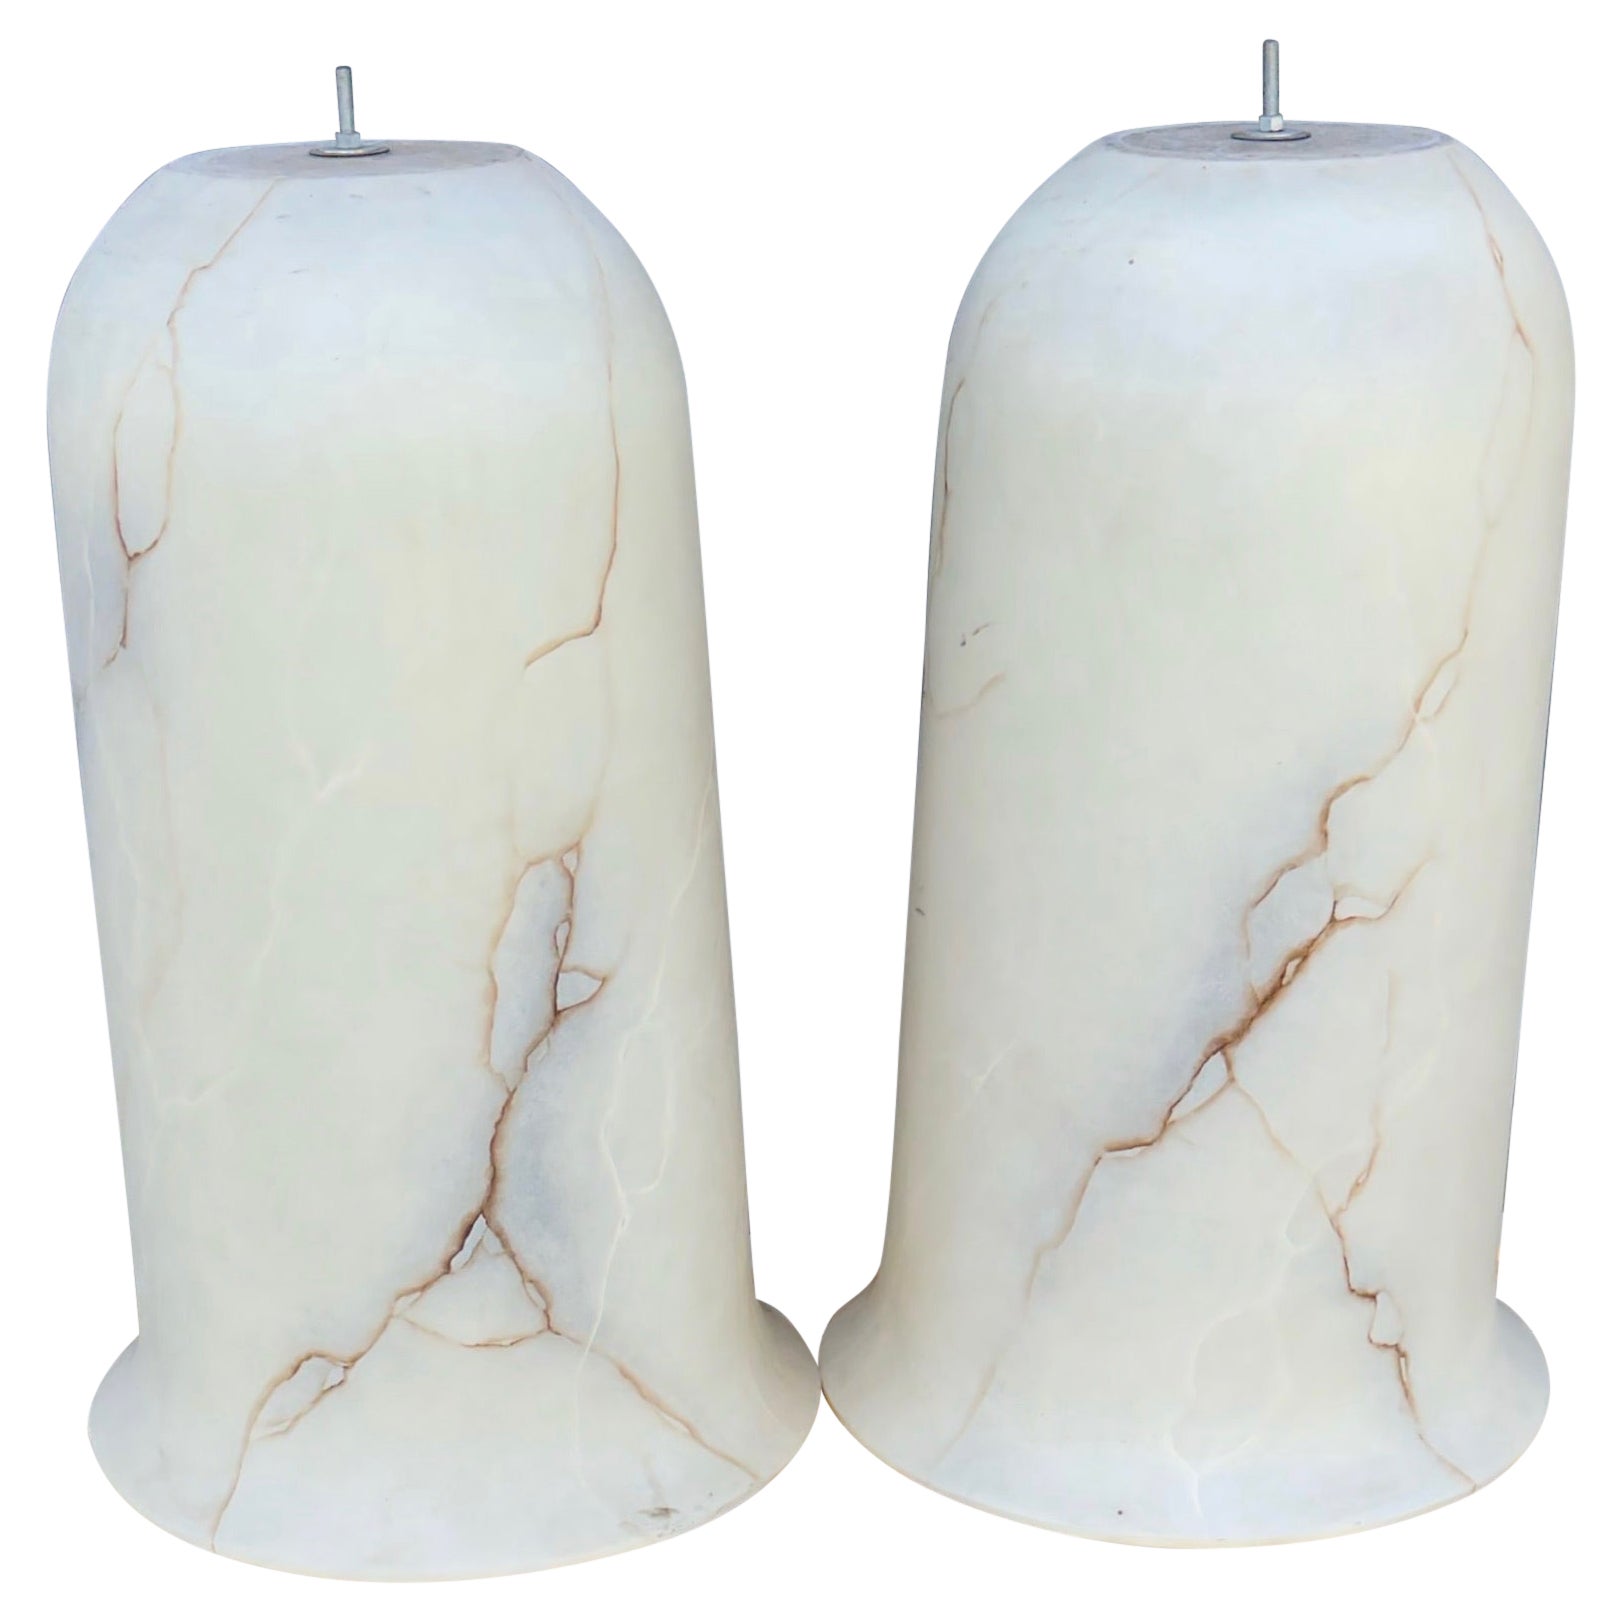 King Size and Unique Pair of White Alabaster Like Pendant Lights with Veins